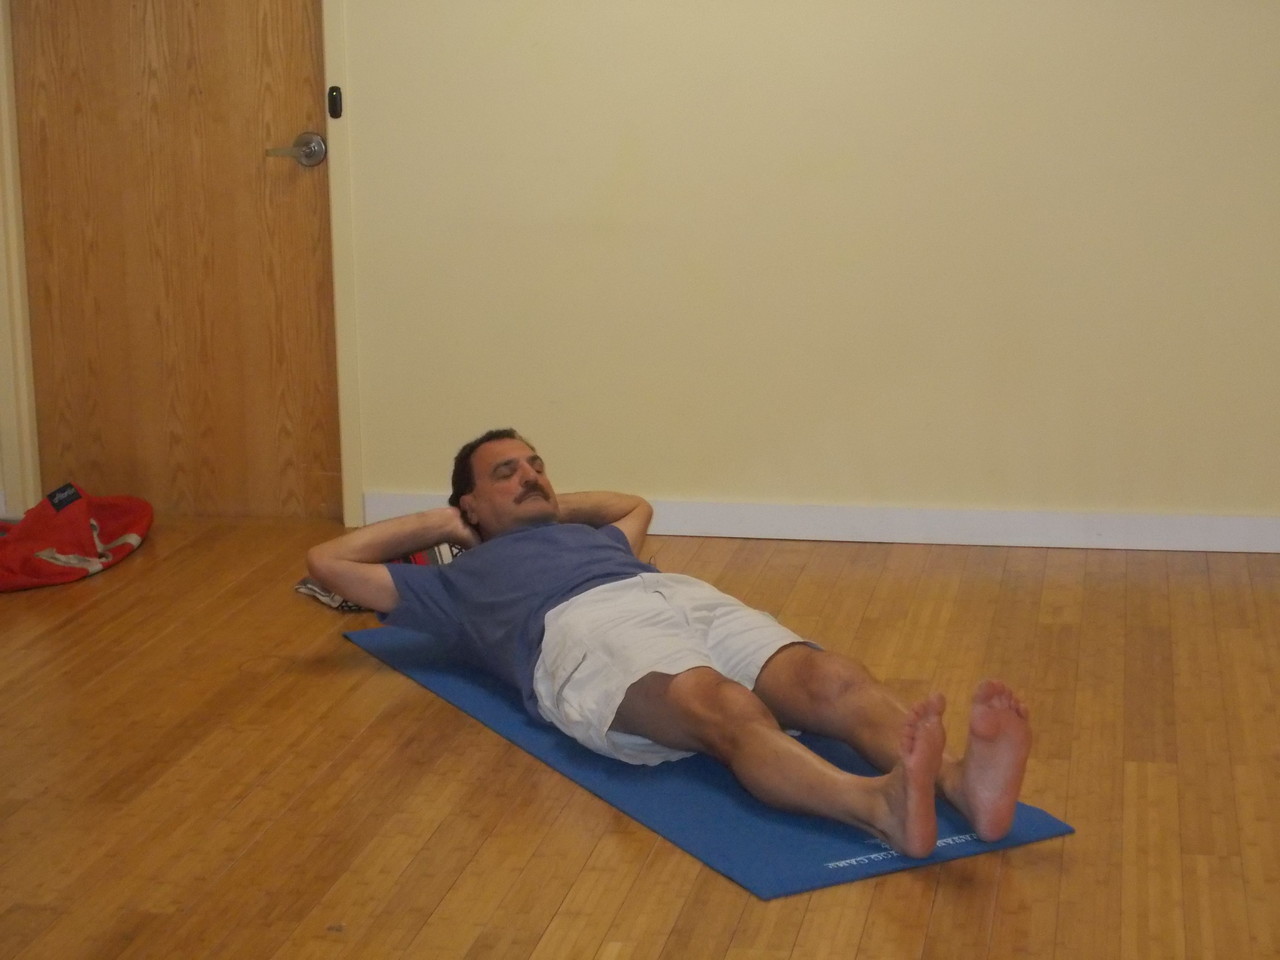 Rectus Adbominis pose, Use your trunk muscles to lift up and look toward toes, protect/support the neck, avoid pulling on the head.